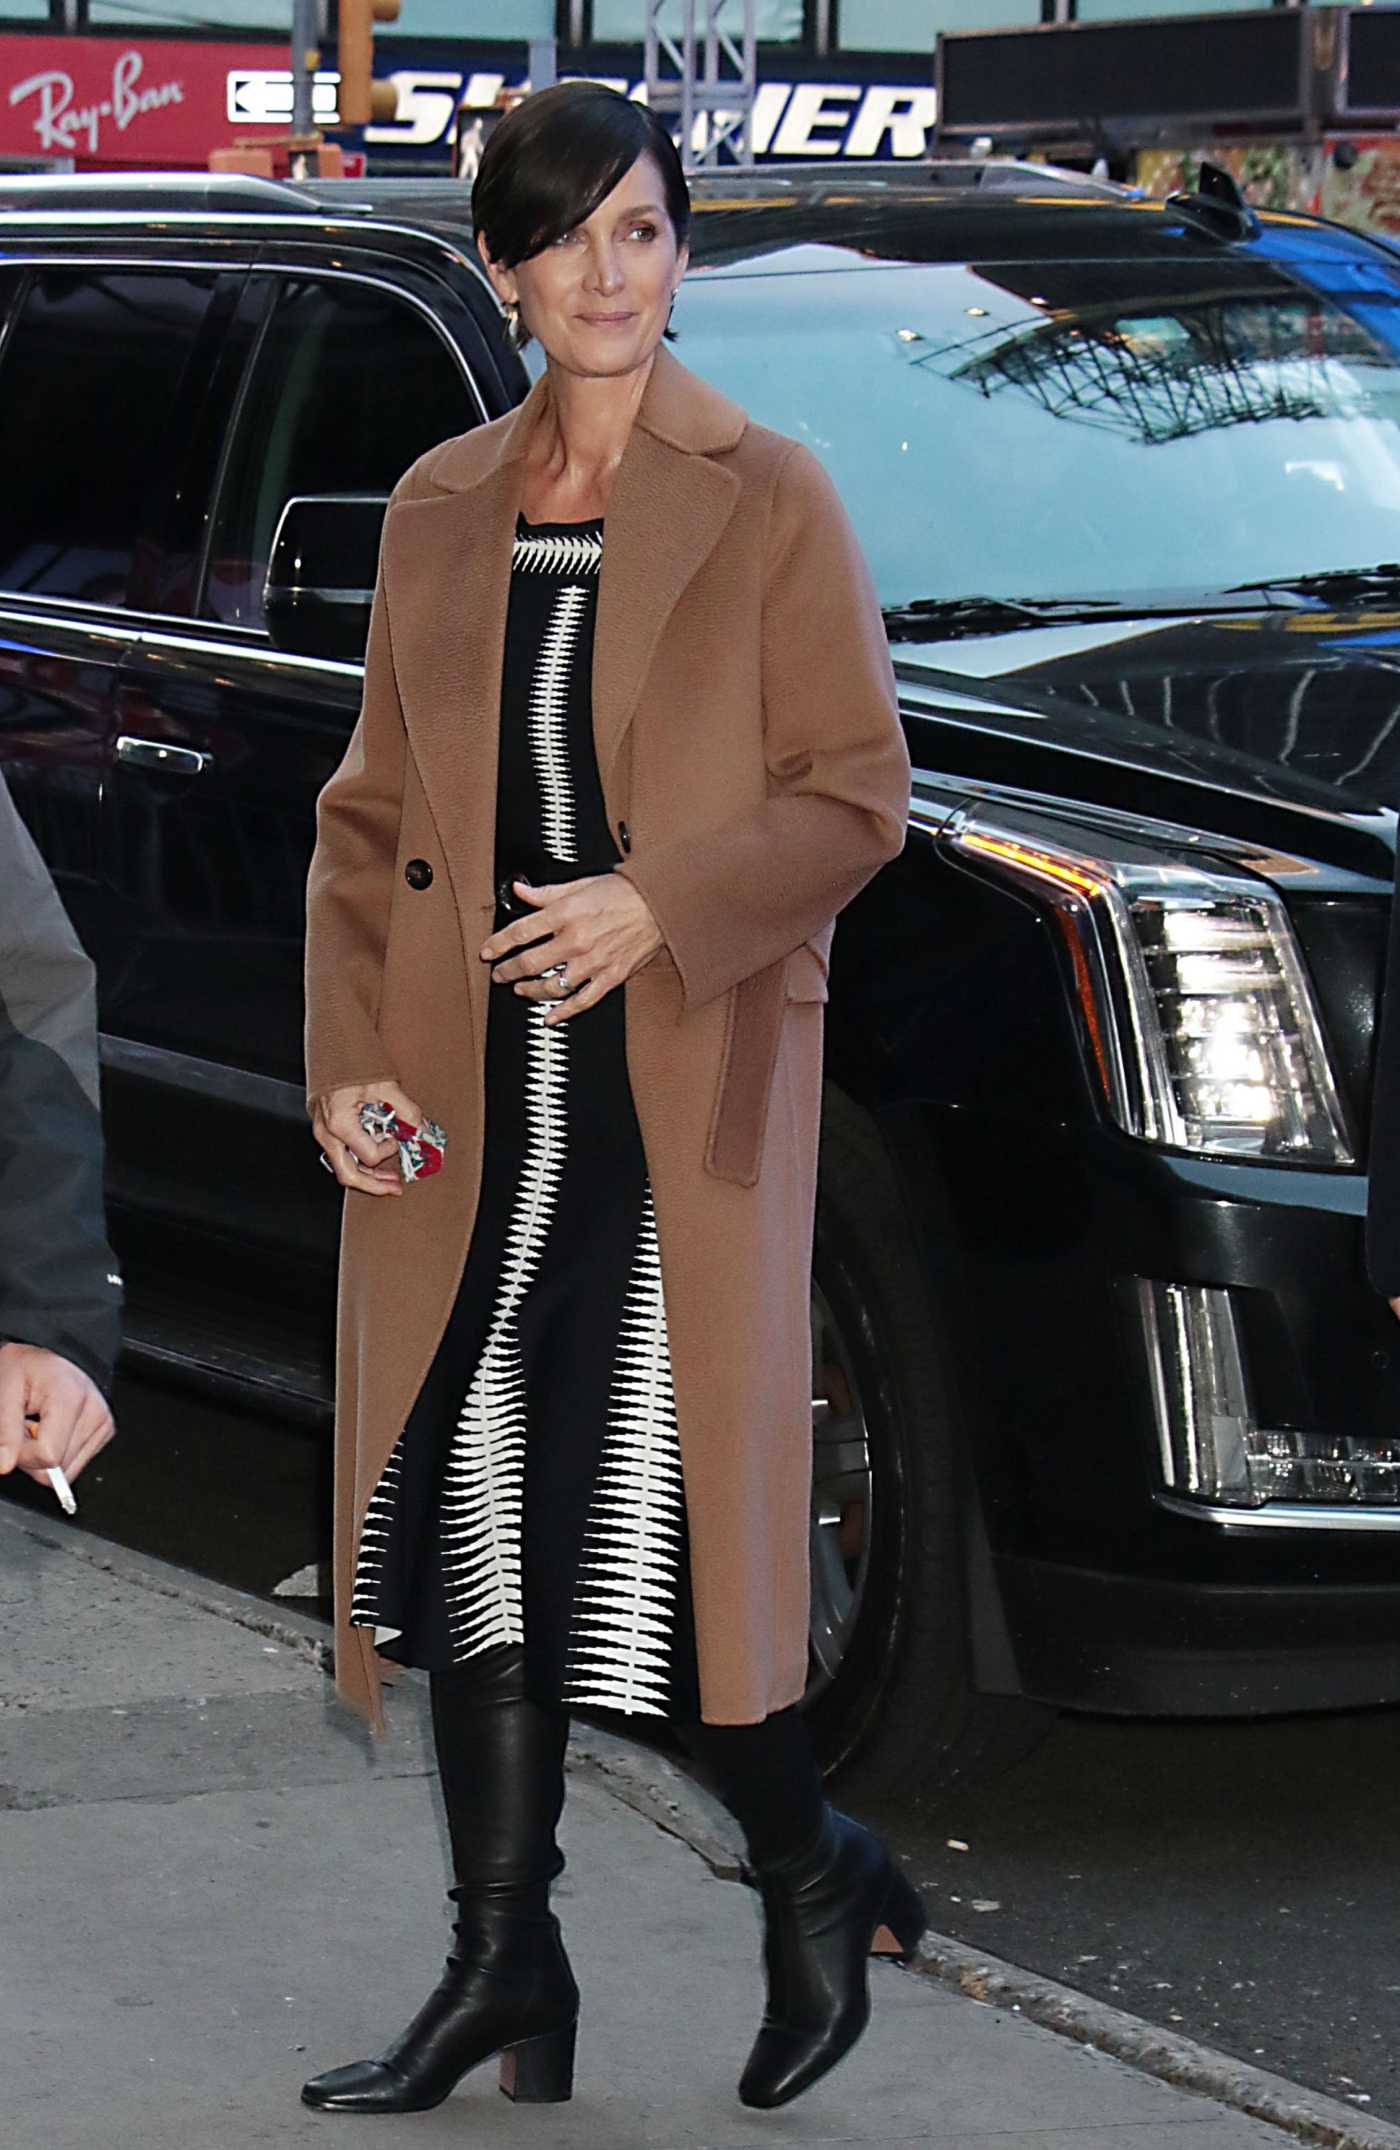 Carrie-Anne Moss in a Tan Coat Promotes The Matrix Resurrections at Good Morning America in New York 12/14/2021